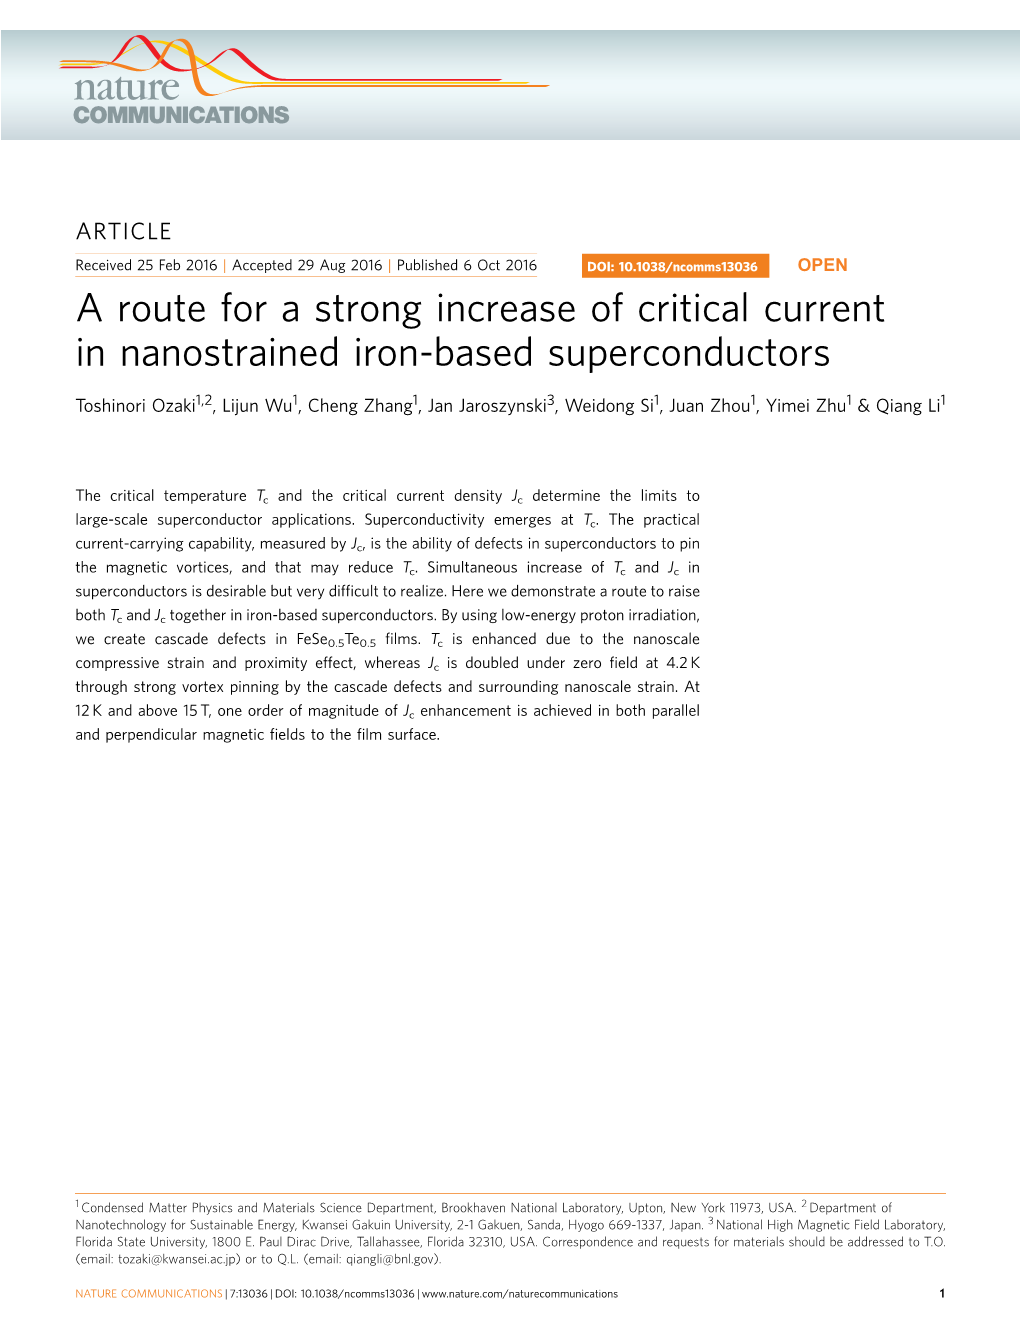 A Route for a Strong Increase of Critical Current in Nanostrained Iron-Based Superconductors